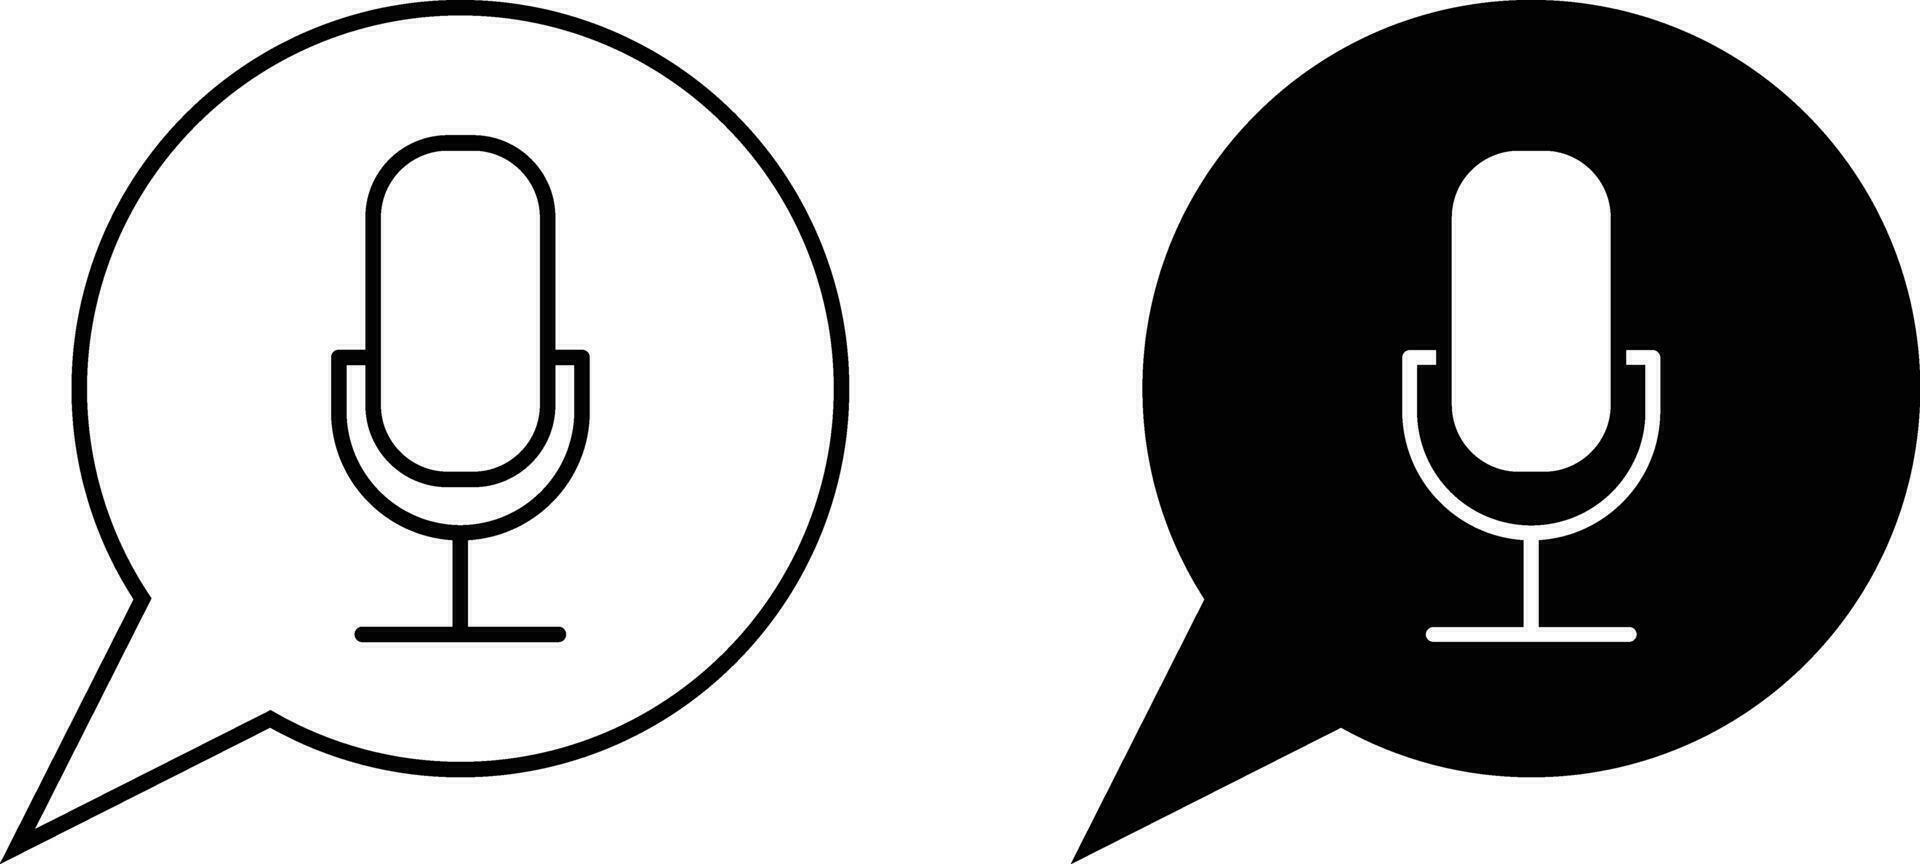 Voice message icon sheet, simple trendy flat style line and solid Isolated vector illustration on white background. For apps, logo, websites, symbol , UI, UX, graphic and web design. EPS 10.